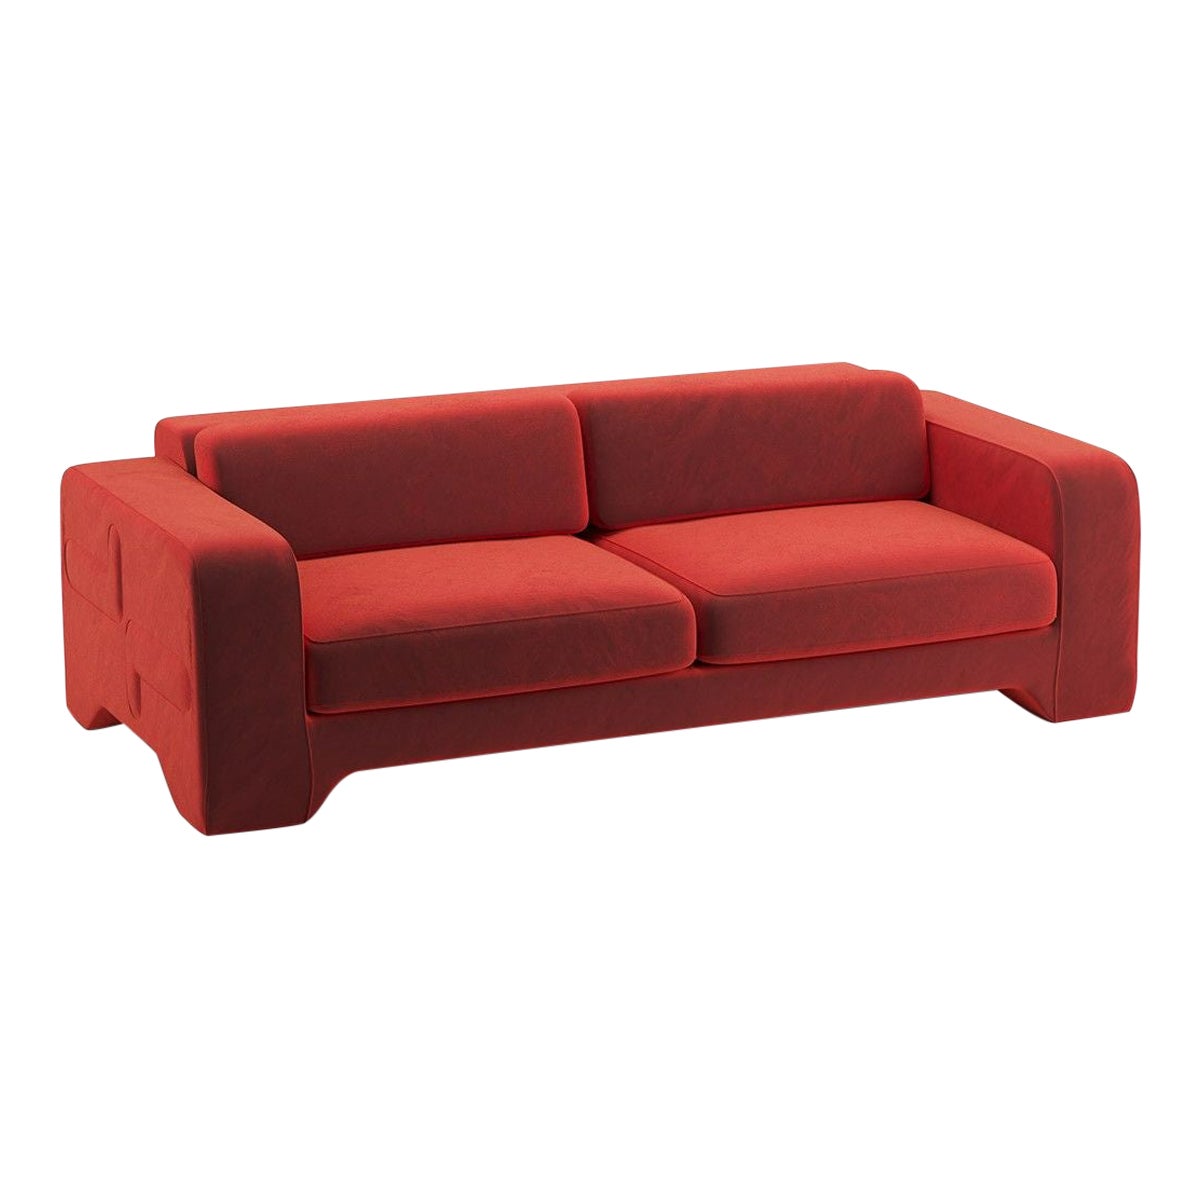 Popus Editions Giovanna 4 Seater Sofa in Vermilion Como Velvet Upholstery For Sale